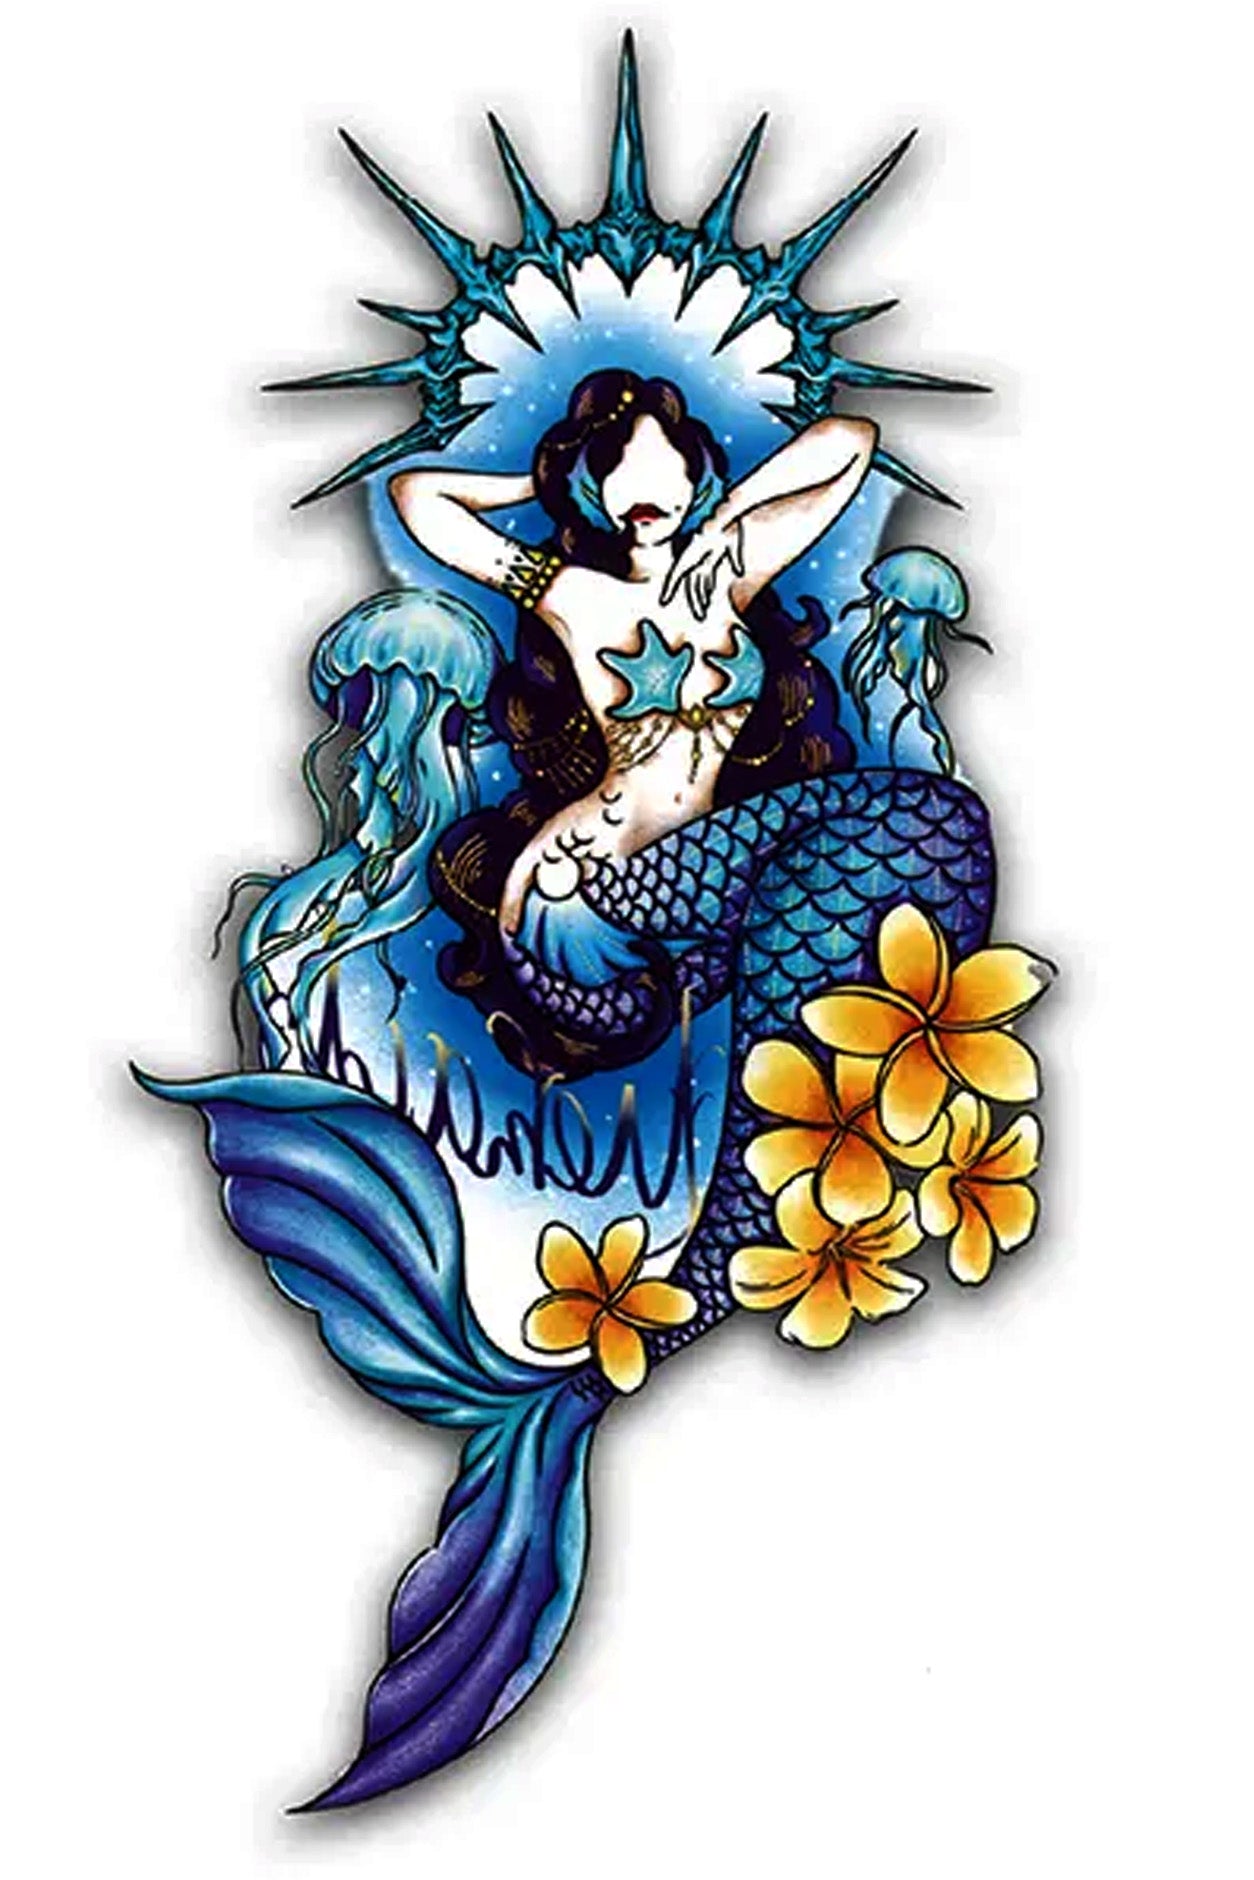 The blue mermaid mystical peacekeeping force to protect nautical maritime adventures. This magical mermaid is matched with golden jasmine flowers, which show trust, integrity, bravery, and loyalty. The artwork stands out and seems to lift off the skin in a 3D look with the shadow behind it.  Creatively wear this artwork on any part of your body, arm, leg, torso, or shoulder.